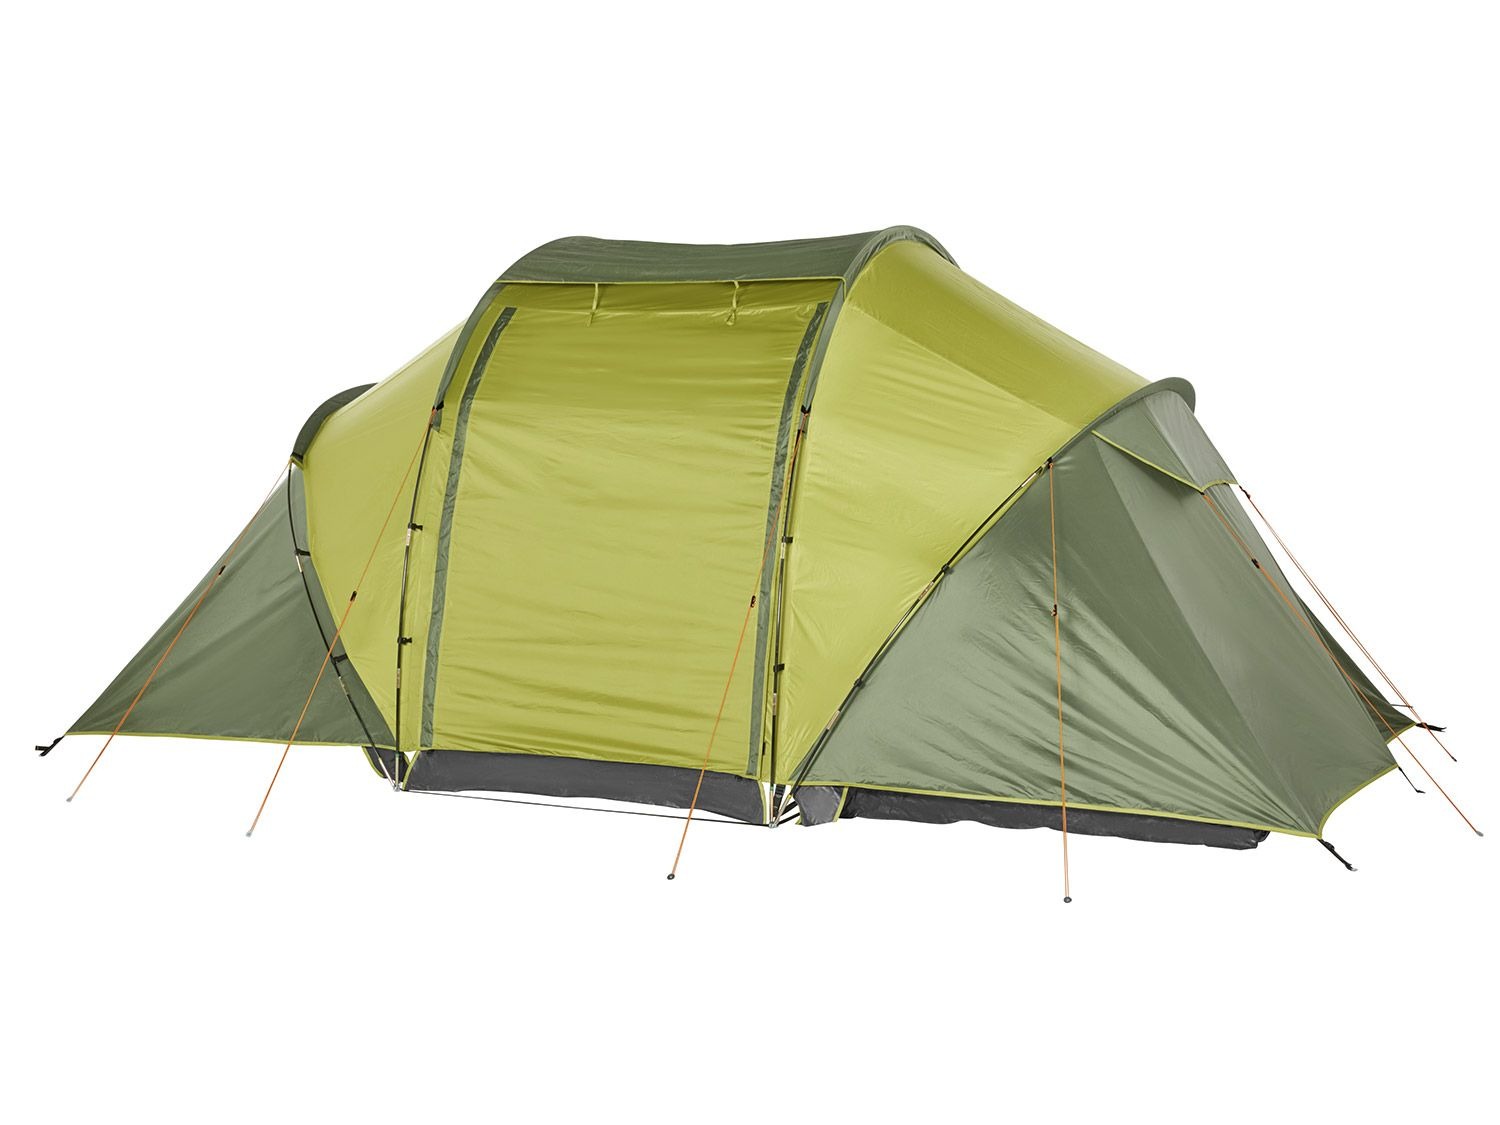 Grote 4-persoons tent verduistering | LIDL